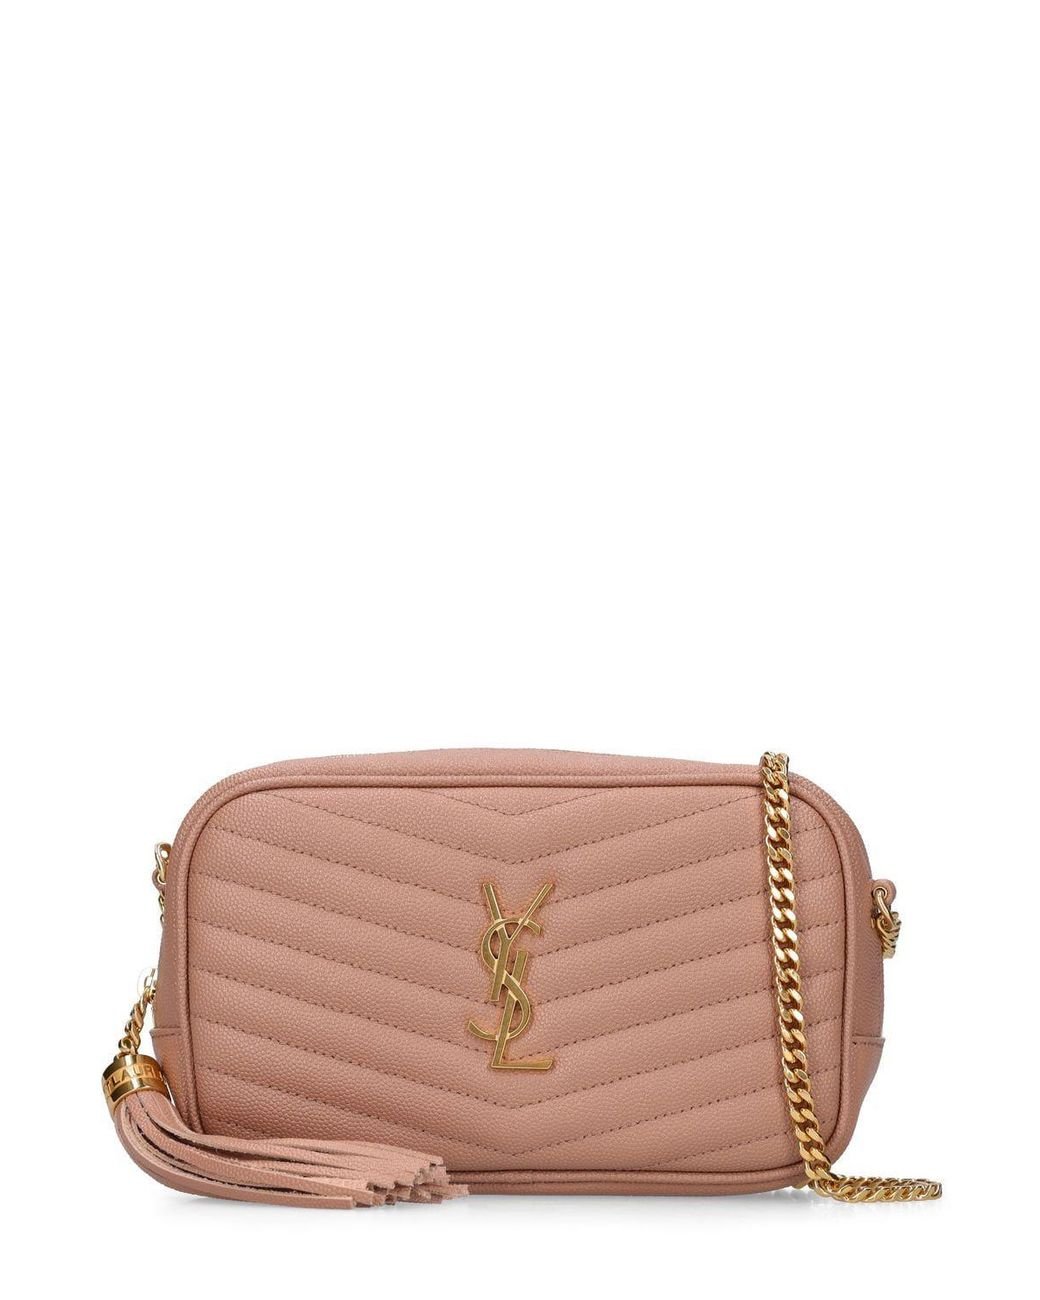 Saint Laurent pink Lou mini quilted leather camera bag